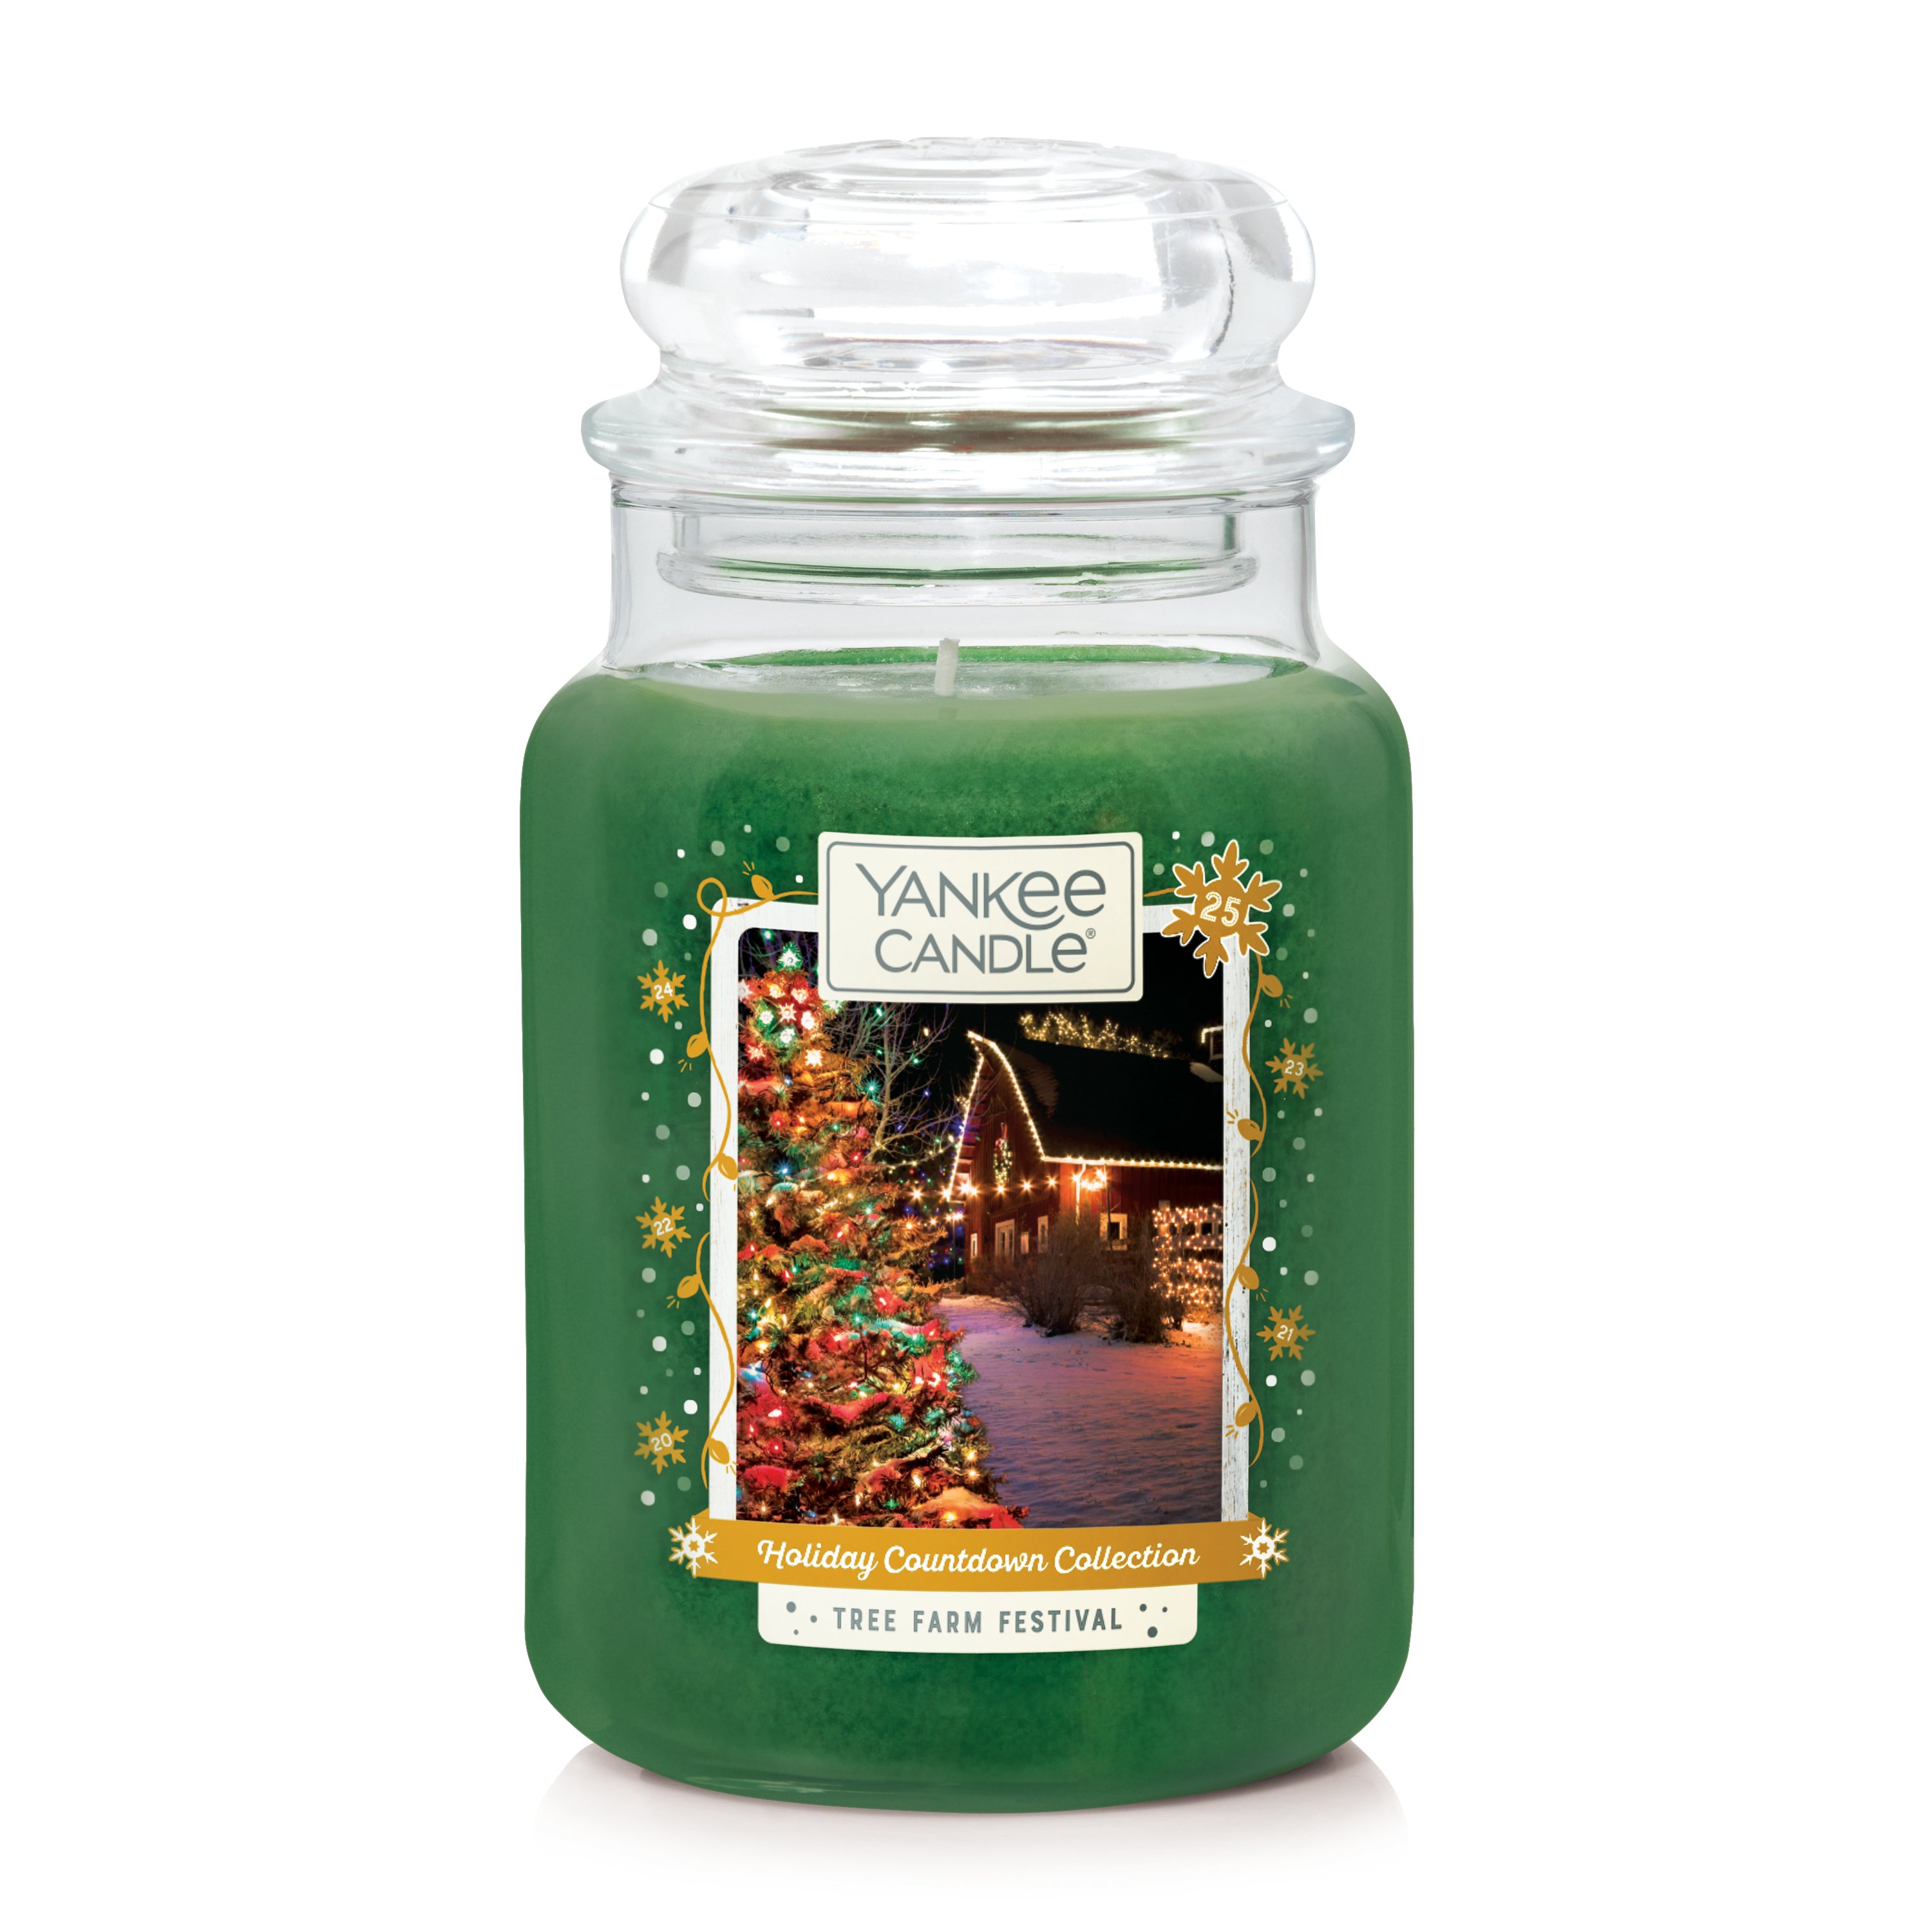 Yankee Candle Review: Is it really as good as its reputation